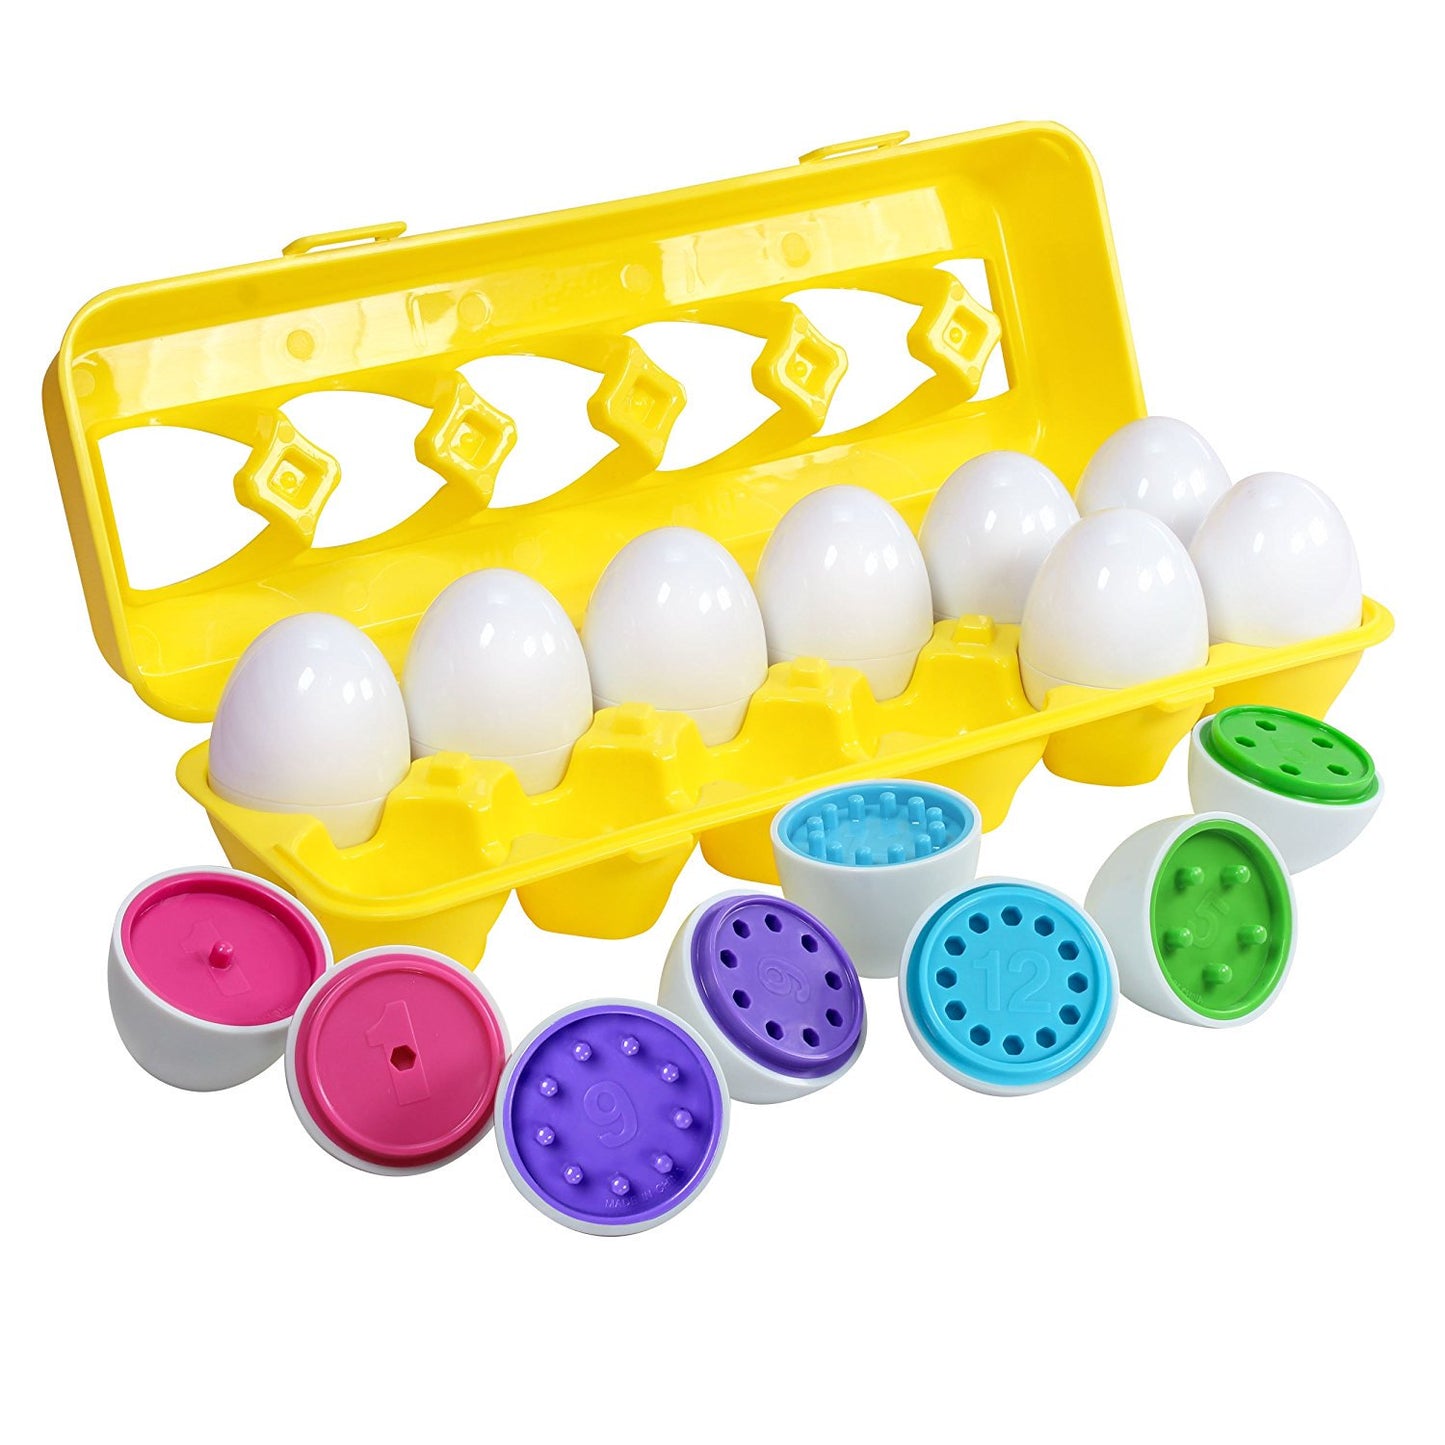 Count and match egg set - educational